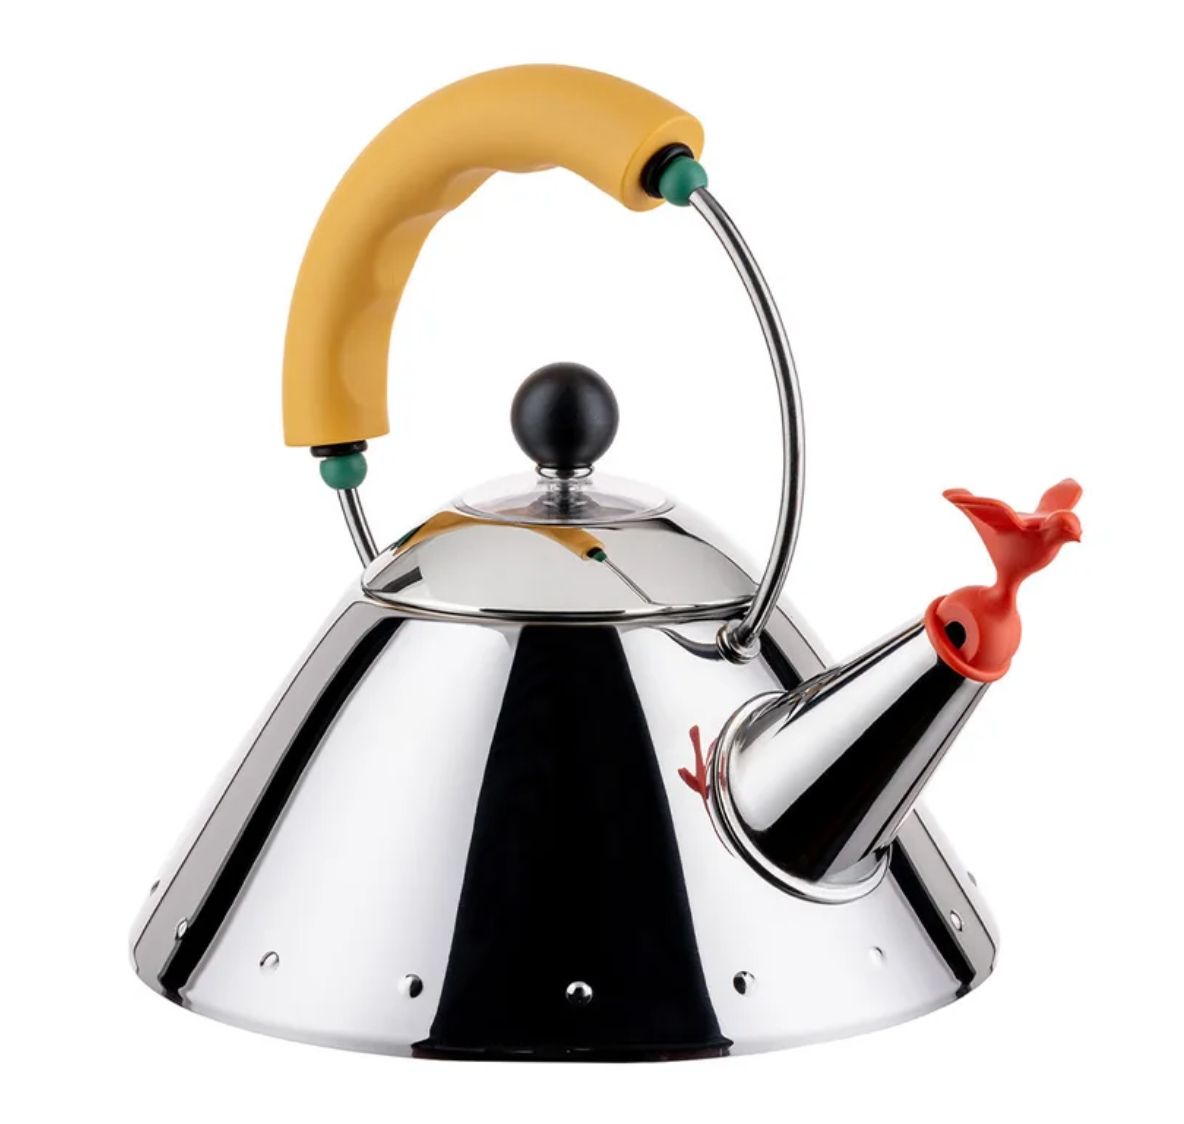 Alessi Michael Graves Small Kettle – Yellow Handle – 33.8 fl oz